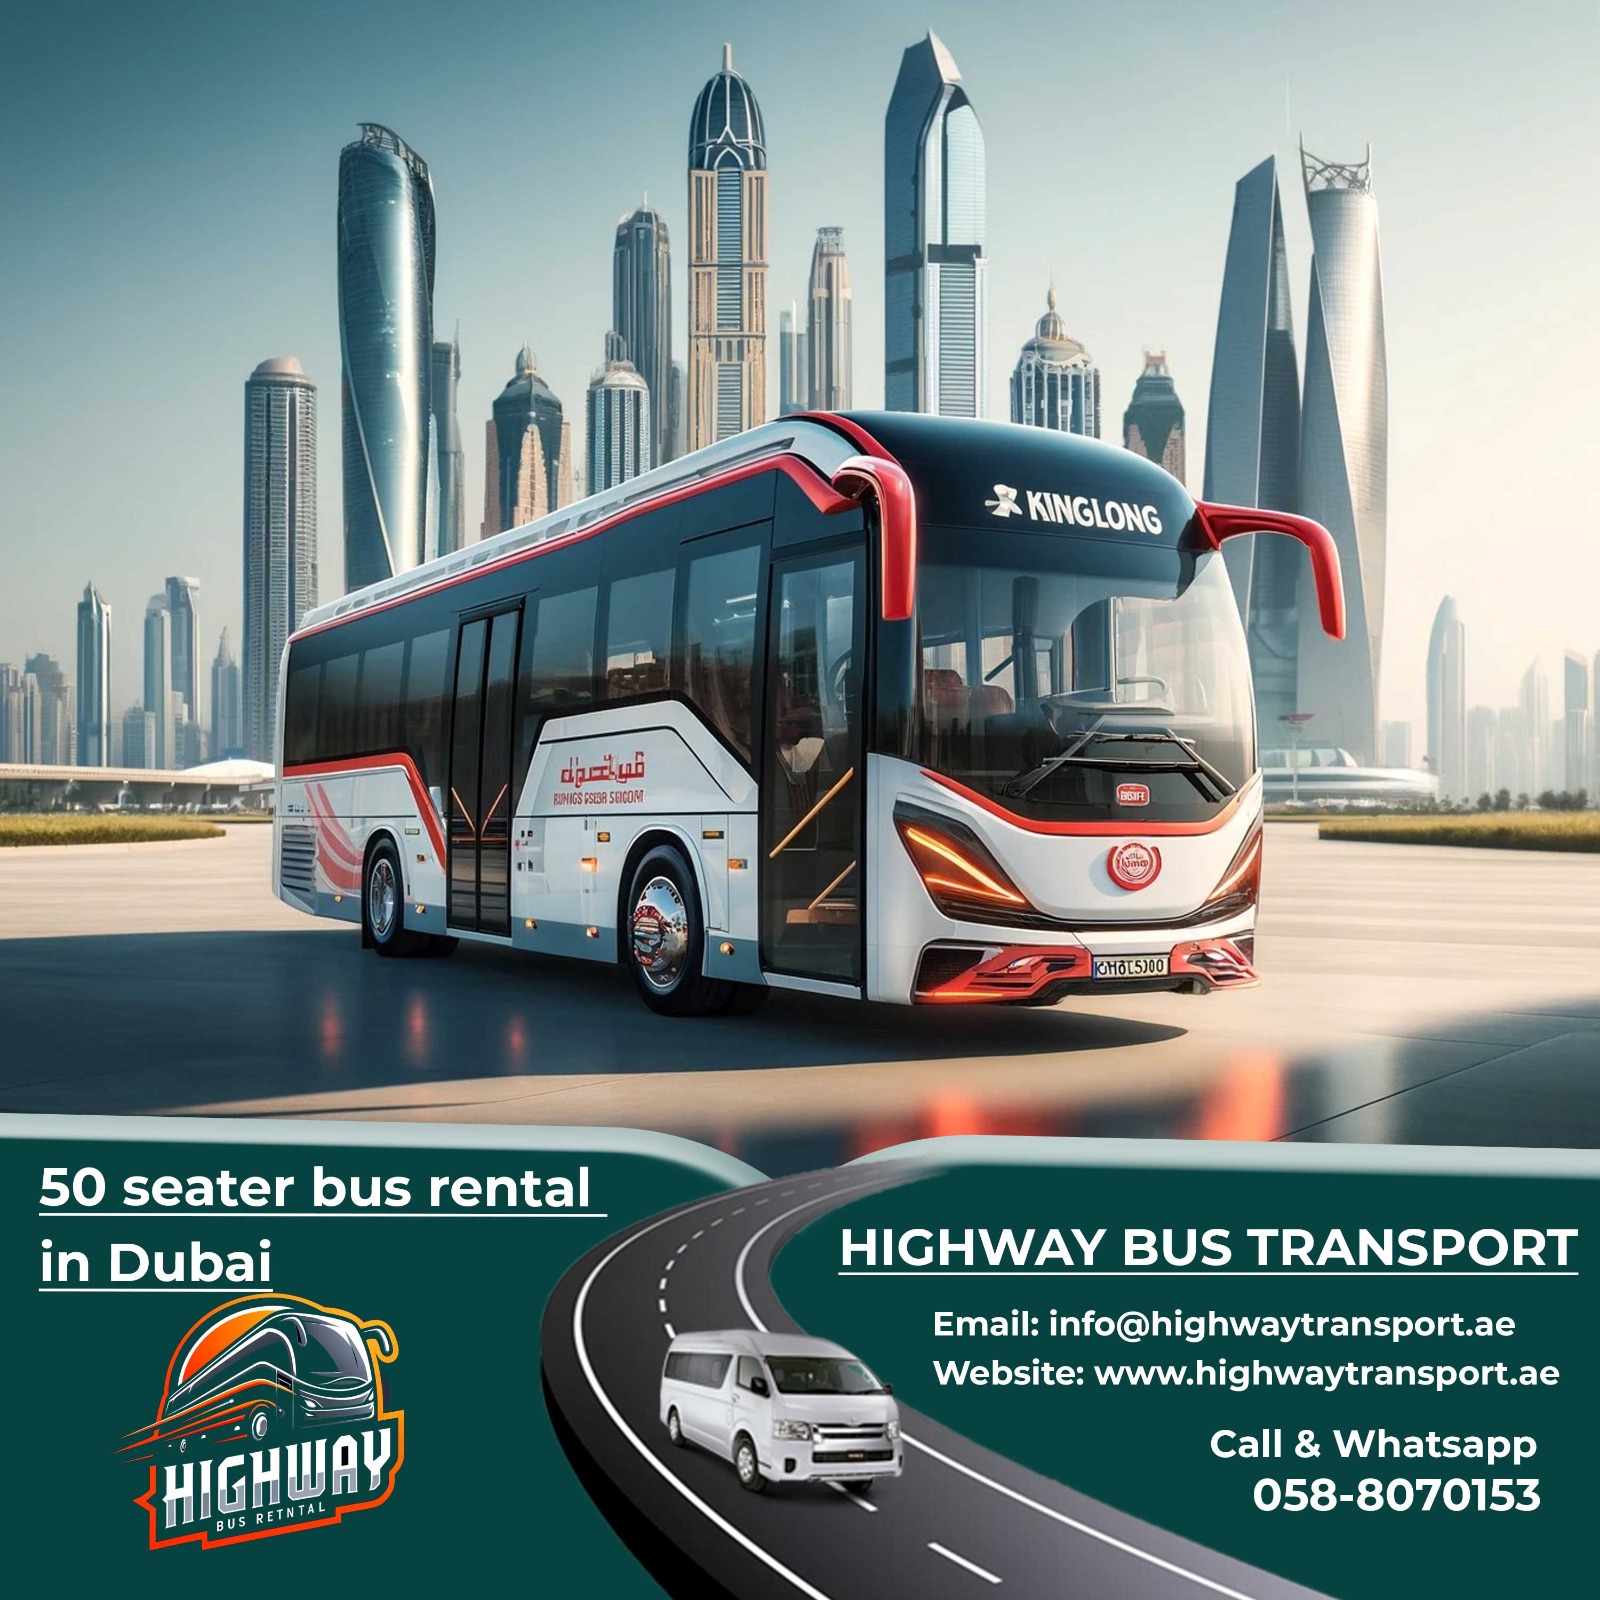 Image of a 50 seater bus available for rental in Dubai